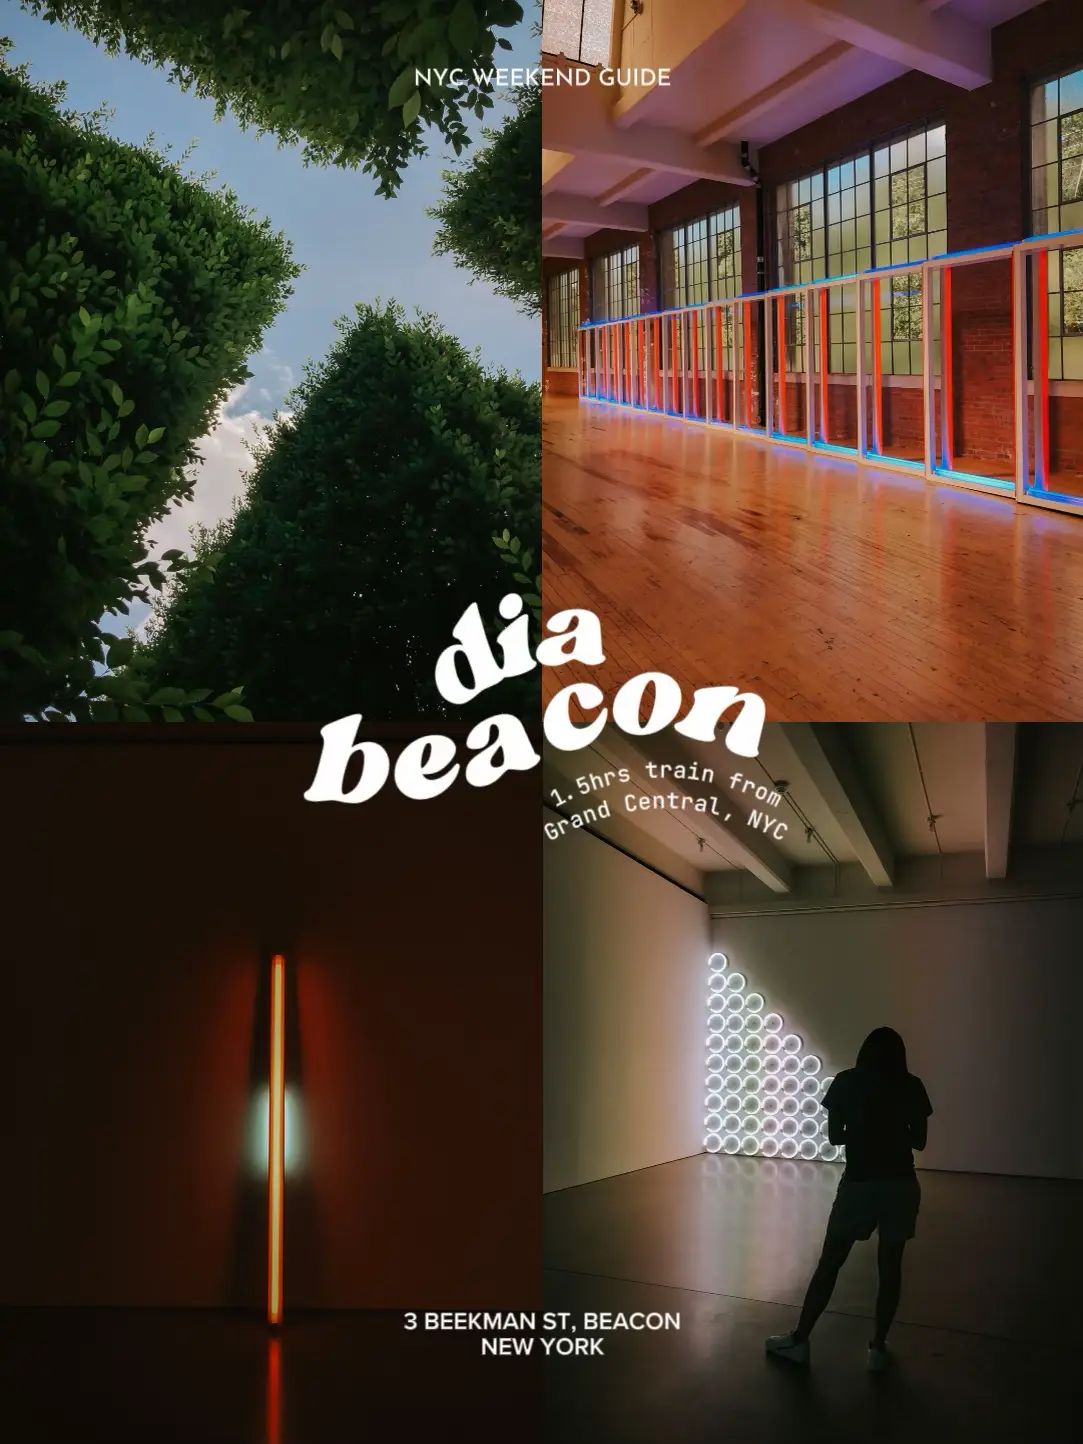 Light, Space, Art in Upstate New York | Dia Beacon's images